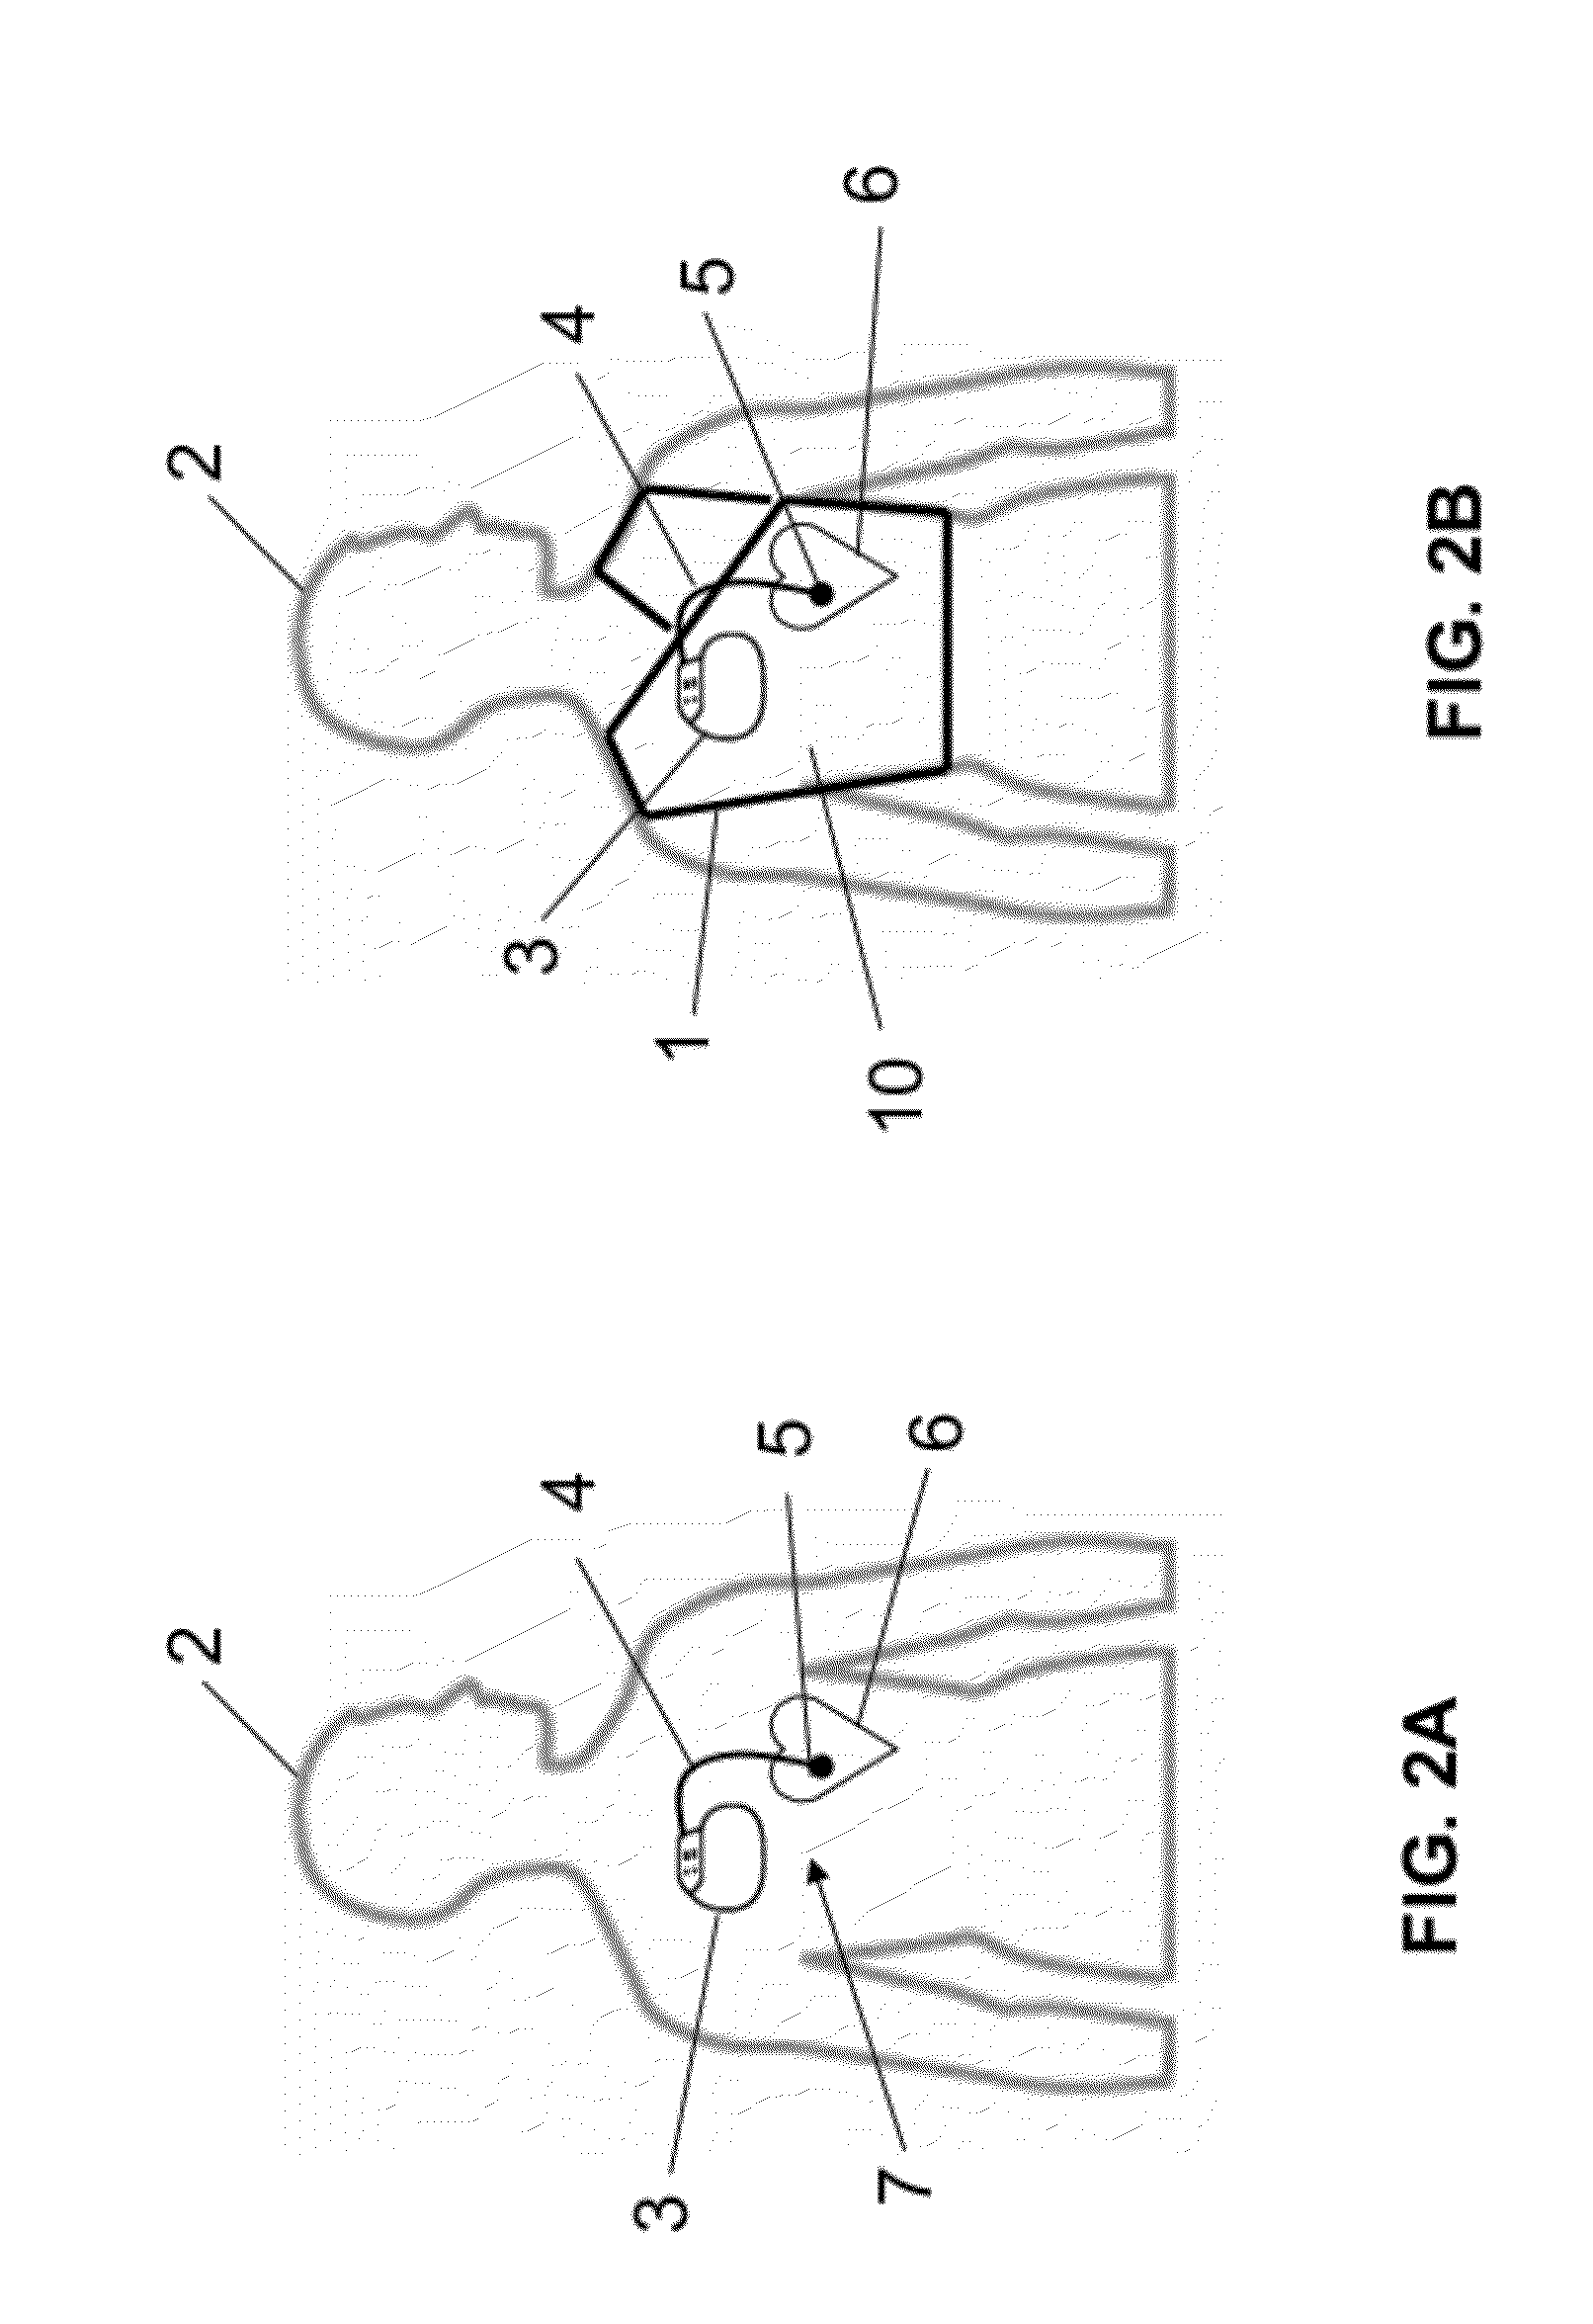 Shielding apparatus and shielding structures for magnetic resonance imaging and method for operating a magnetic resonance imaging scanner